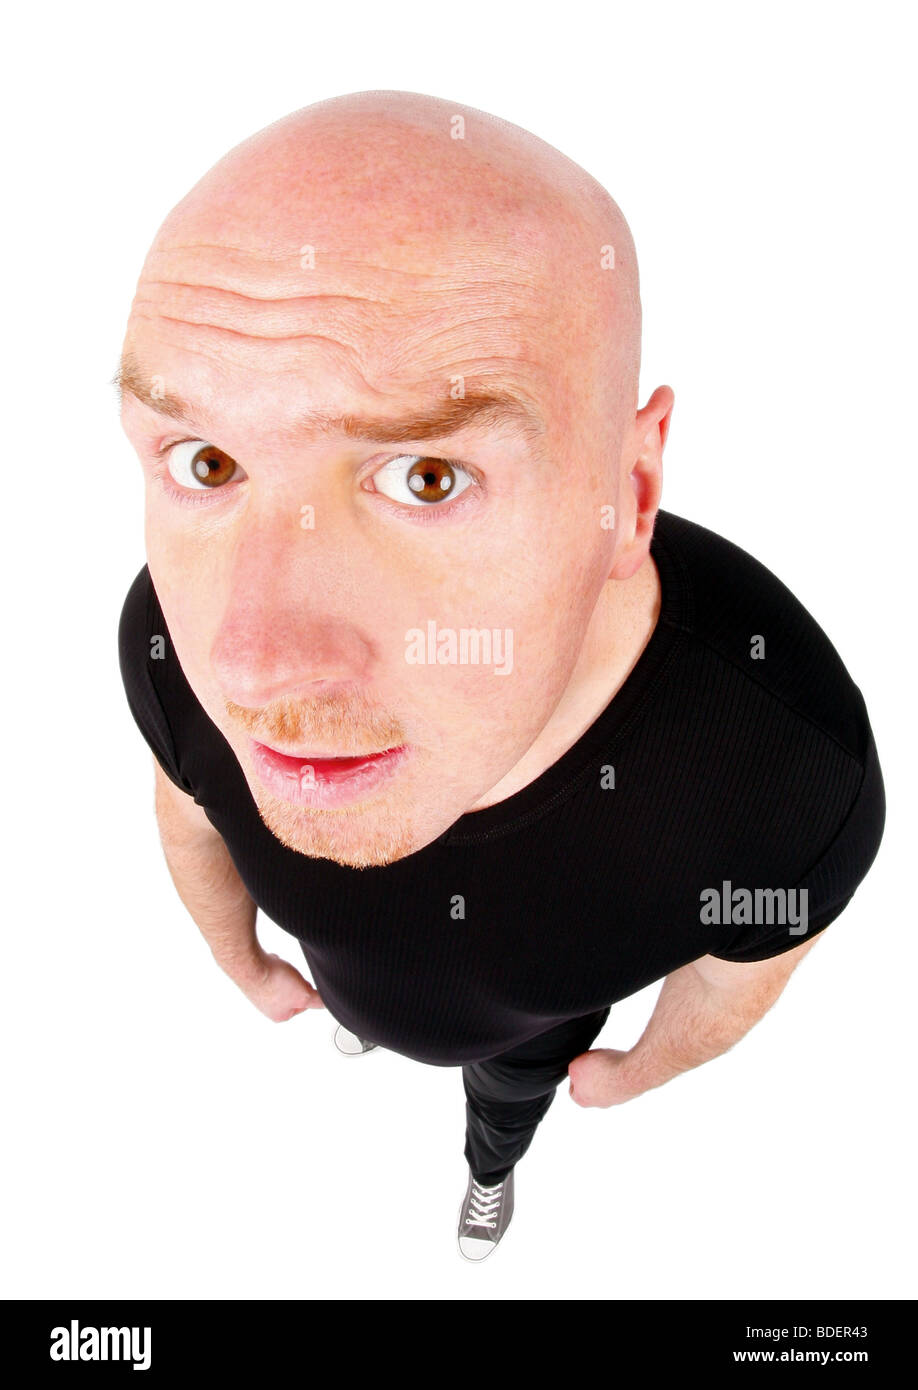 bald headed man looking puzzled into the camera Stock Photo